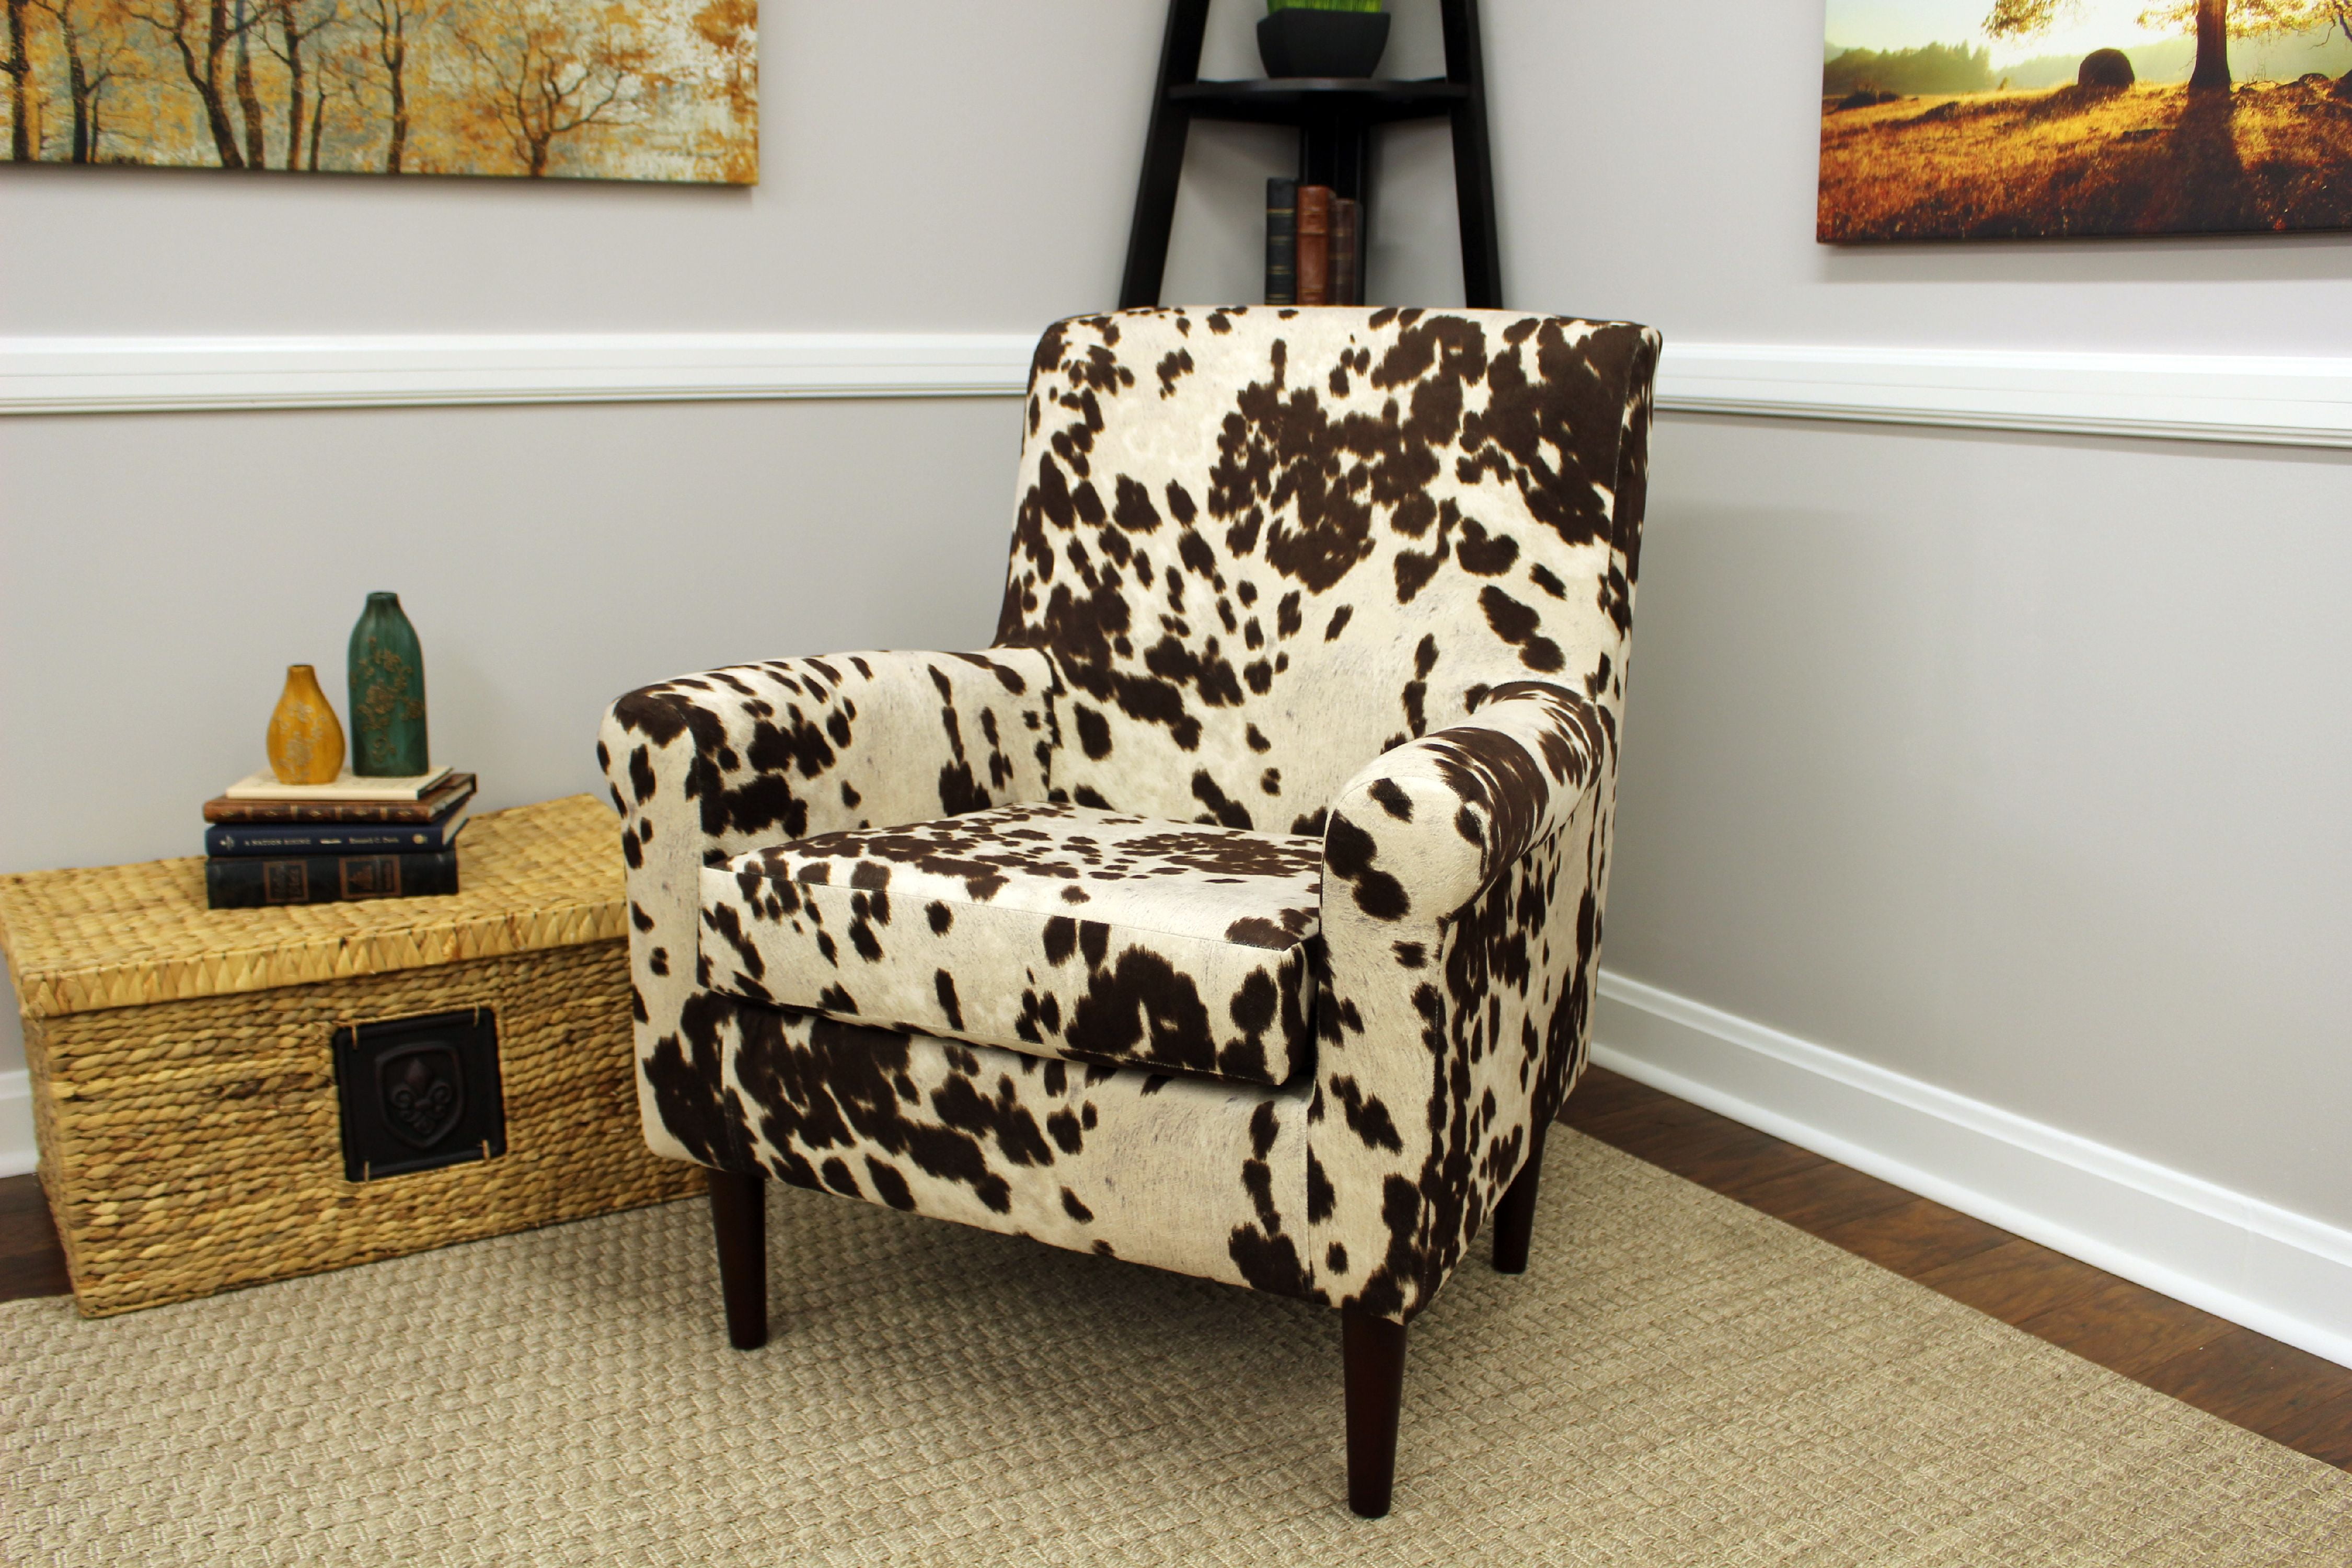 1 Chair + 2 Fabric Patterns = 1 Fabulous Look